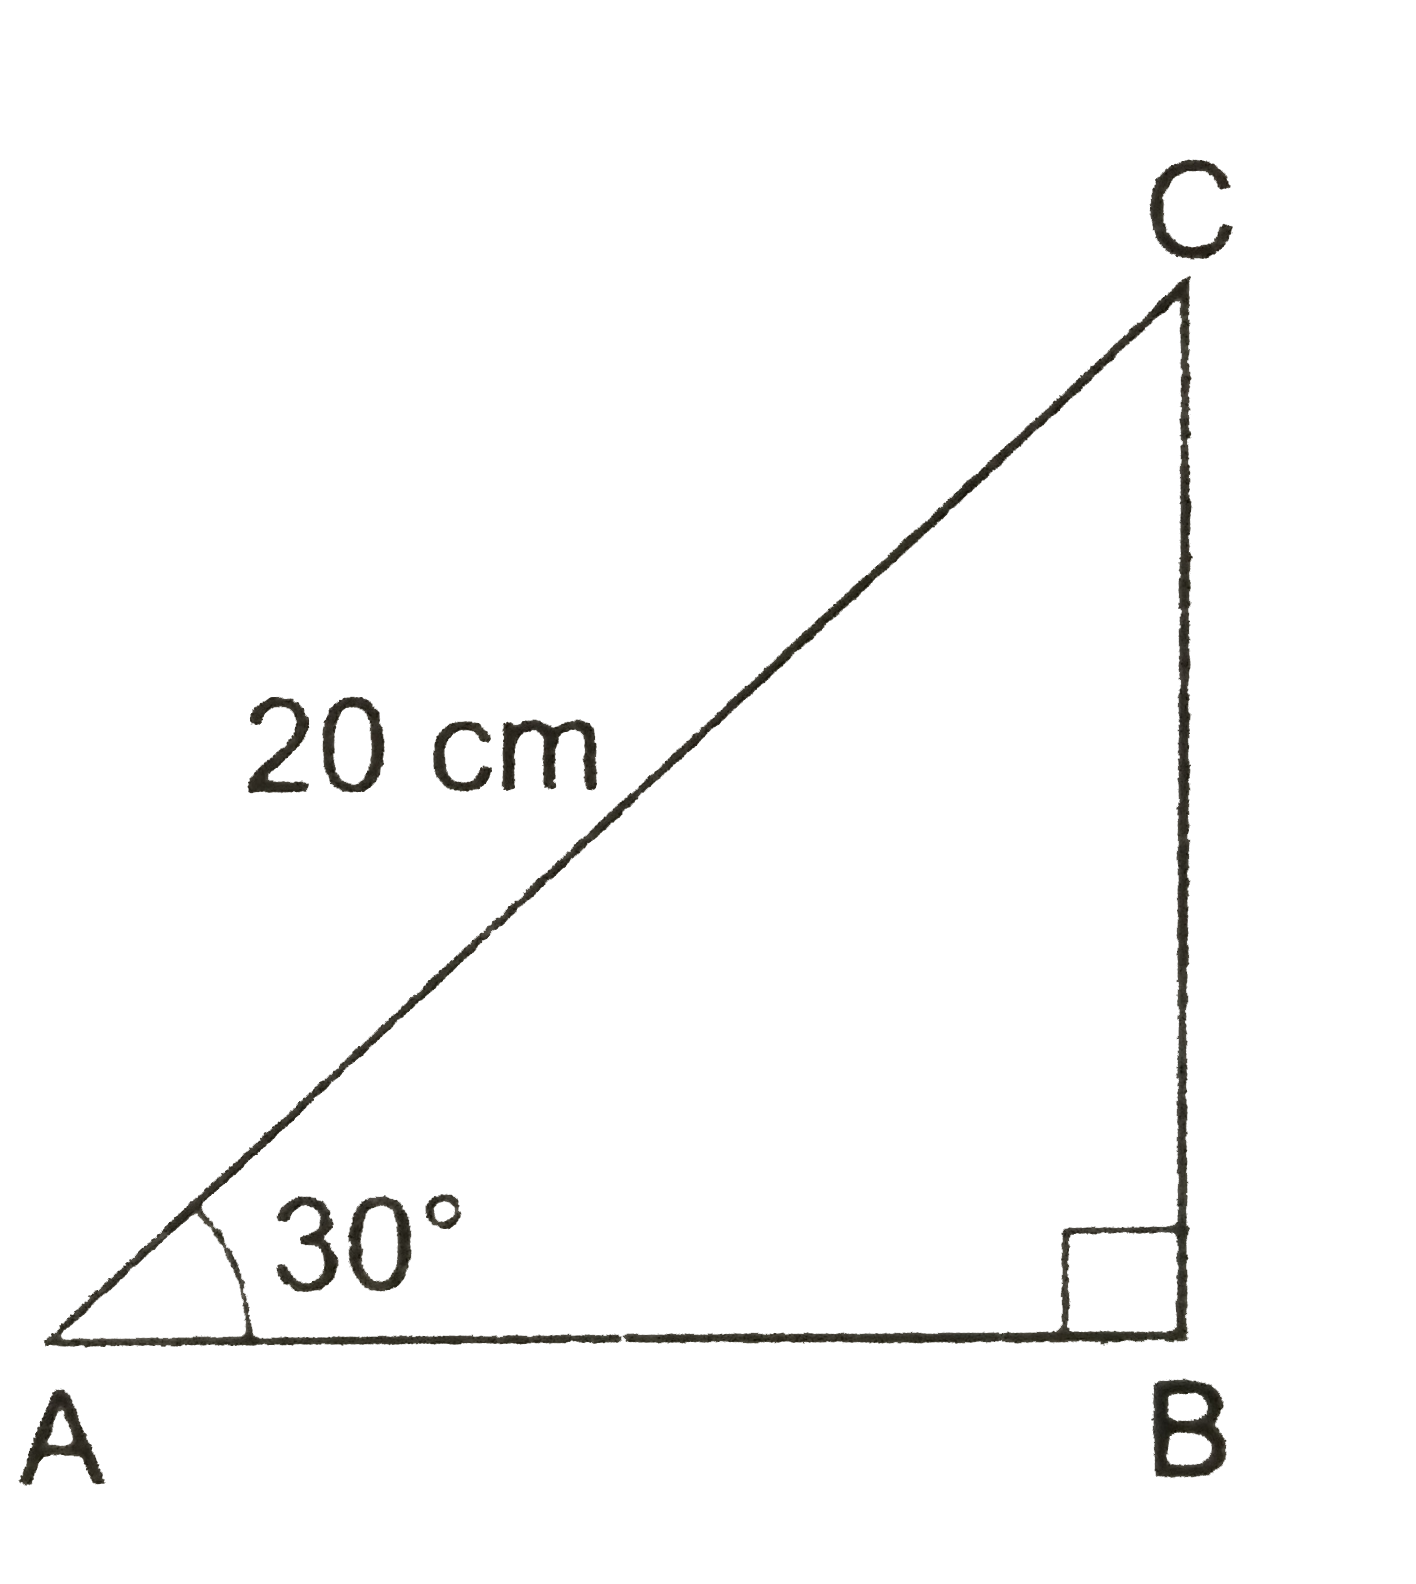 In the adjoining figure, DeltaABC is a right-angled triangle in which /B=90^(@), /A=30^(@) and AC=20cm. Find (i) BC, (ii) AB.